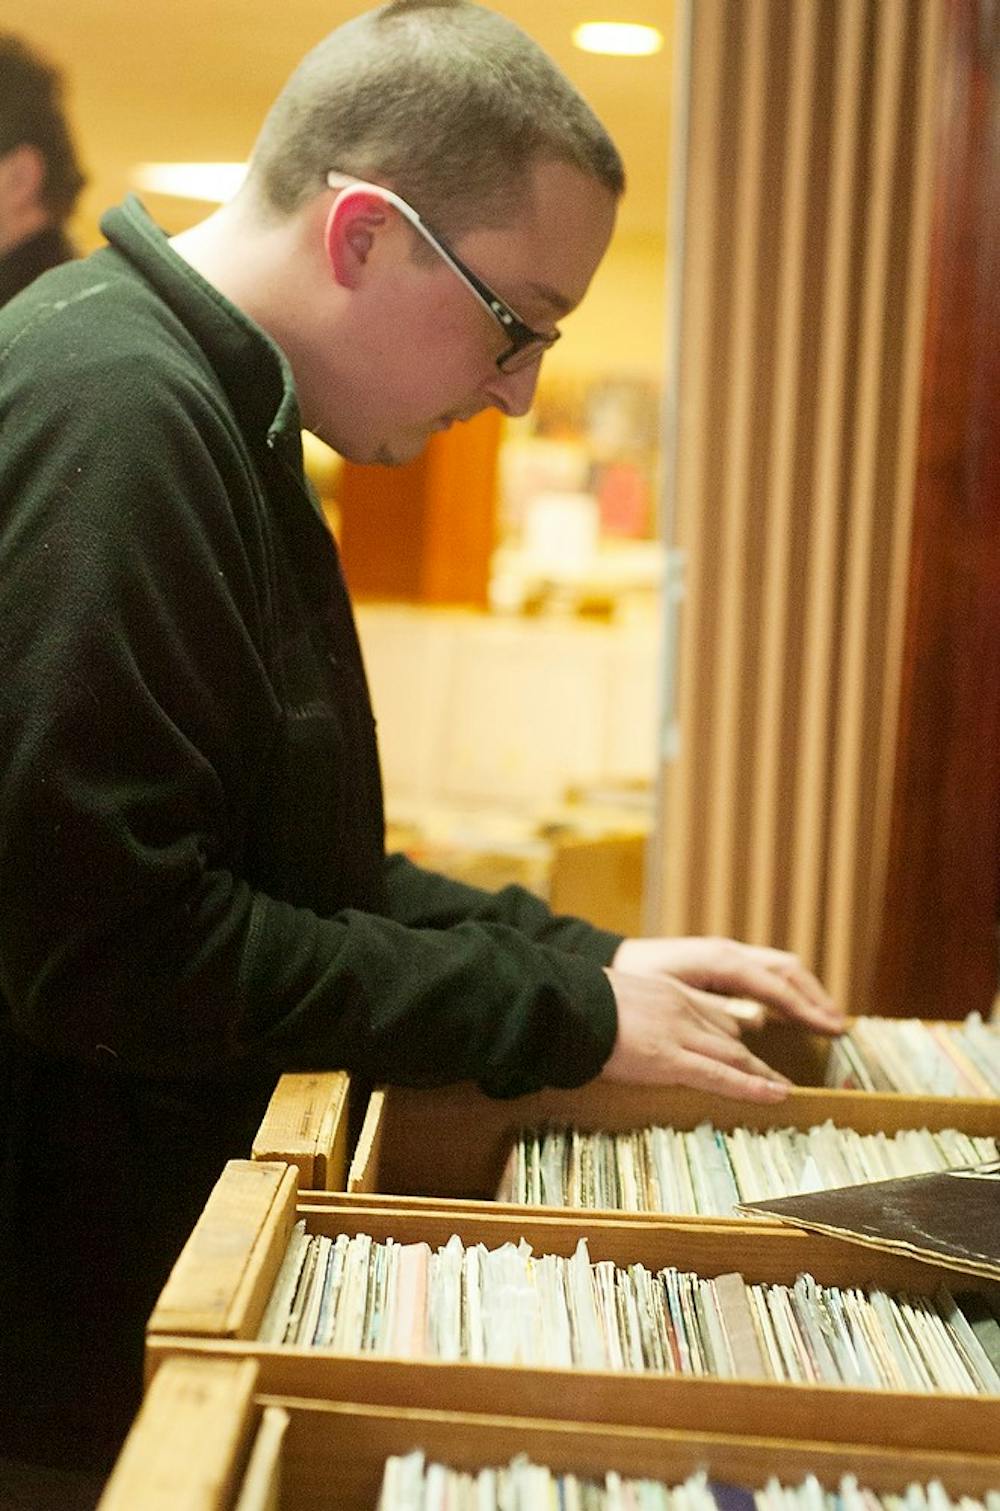 	<p>Lansing resident Brian Jupin looks through records during Lansing record and CD show on Nov. 16, 2013. The show included vinyl albums, 45&#8217;s, posters and <span class="caps">DVD</span>&#8217;s of various artists. Micaela Colonna/The State News</p>